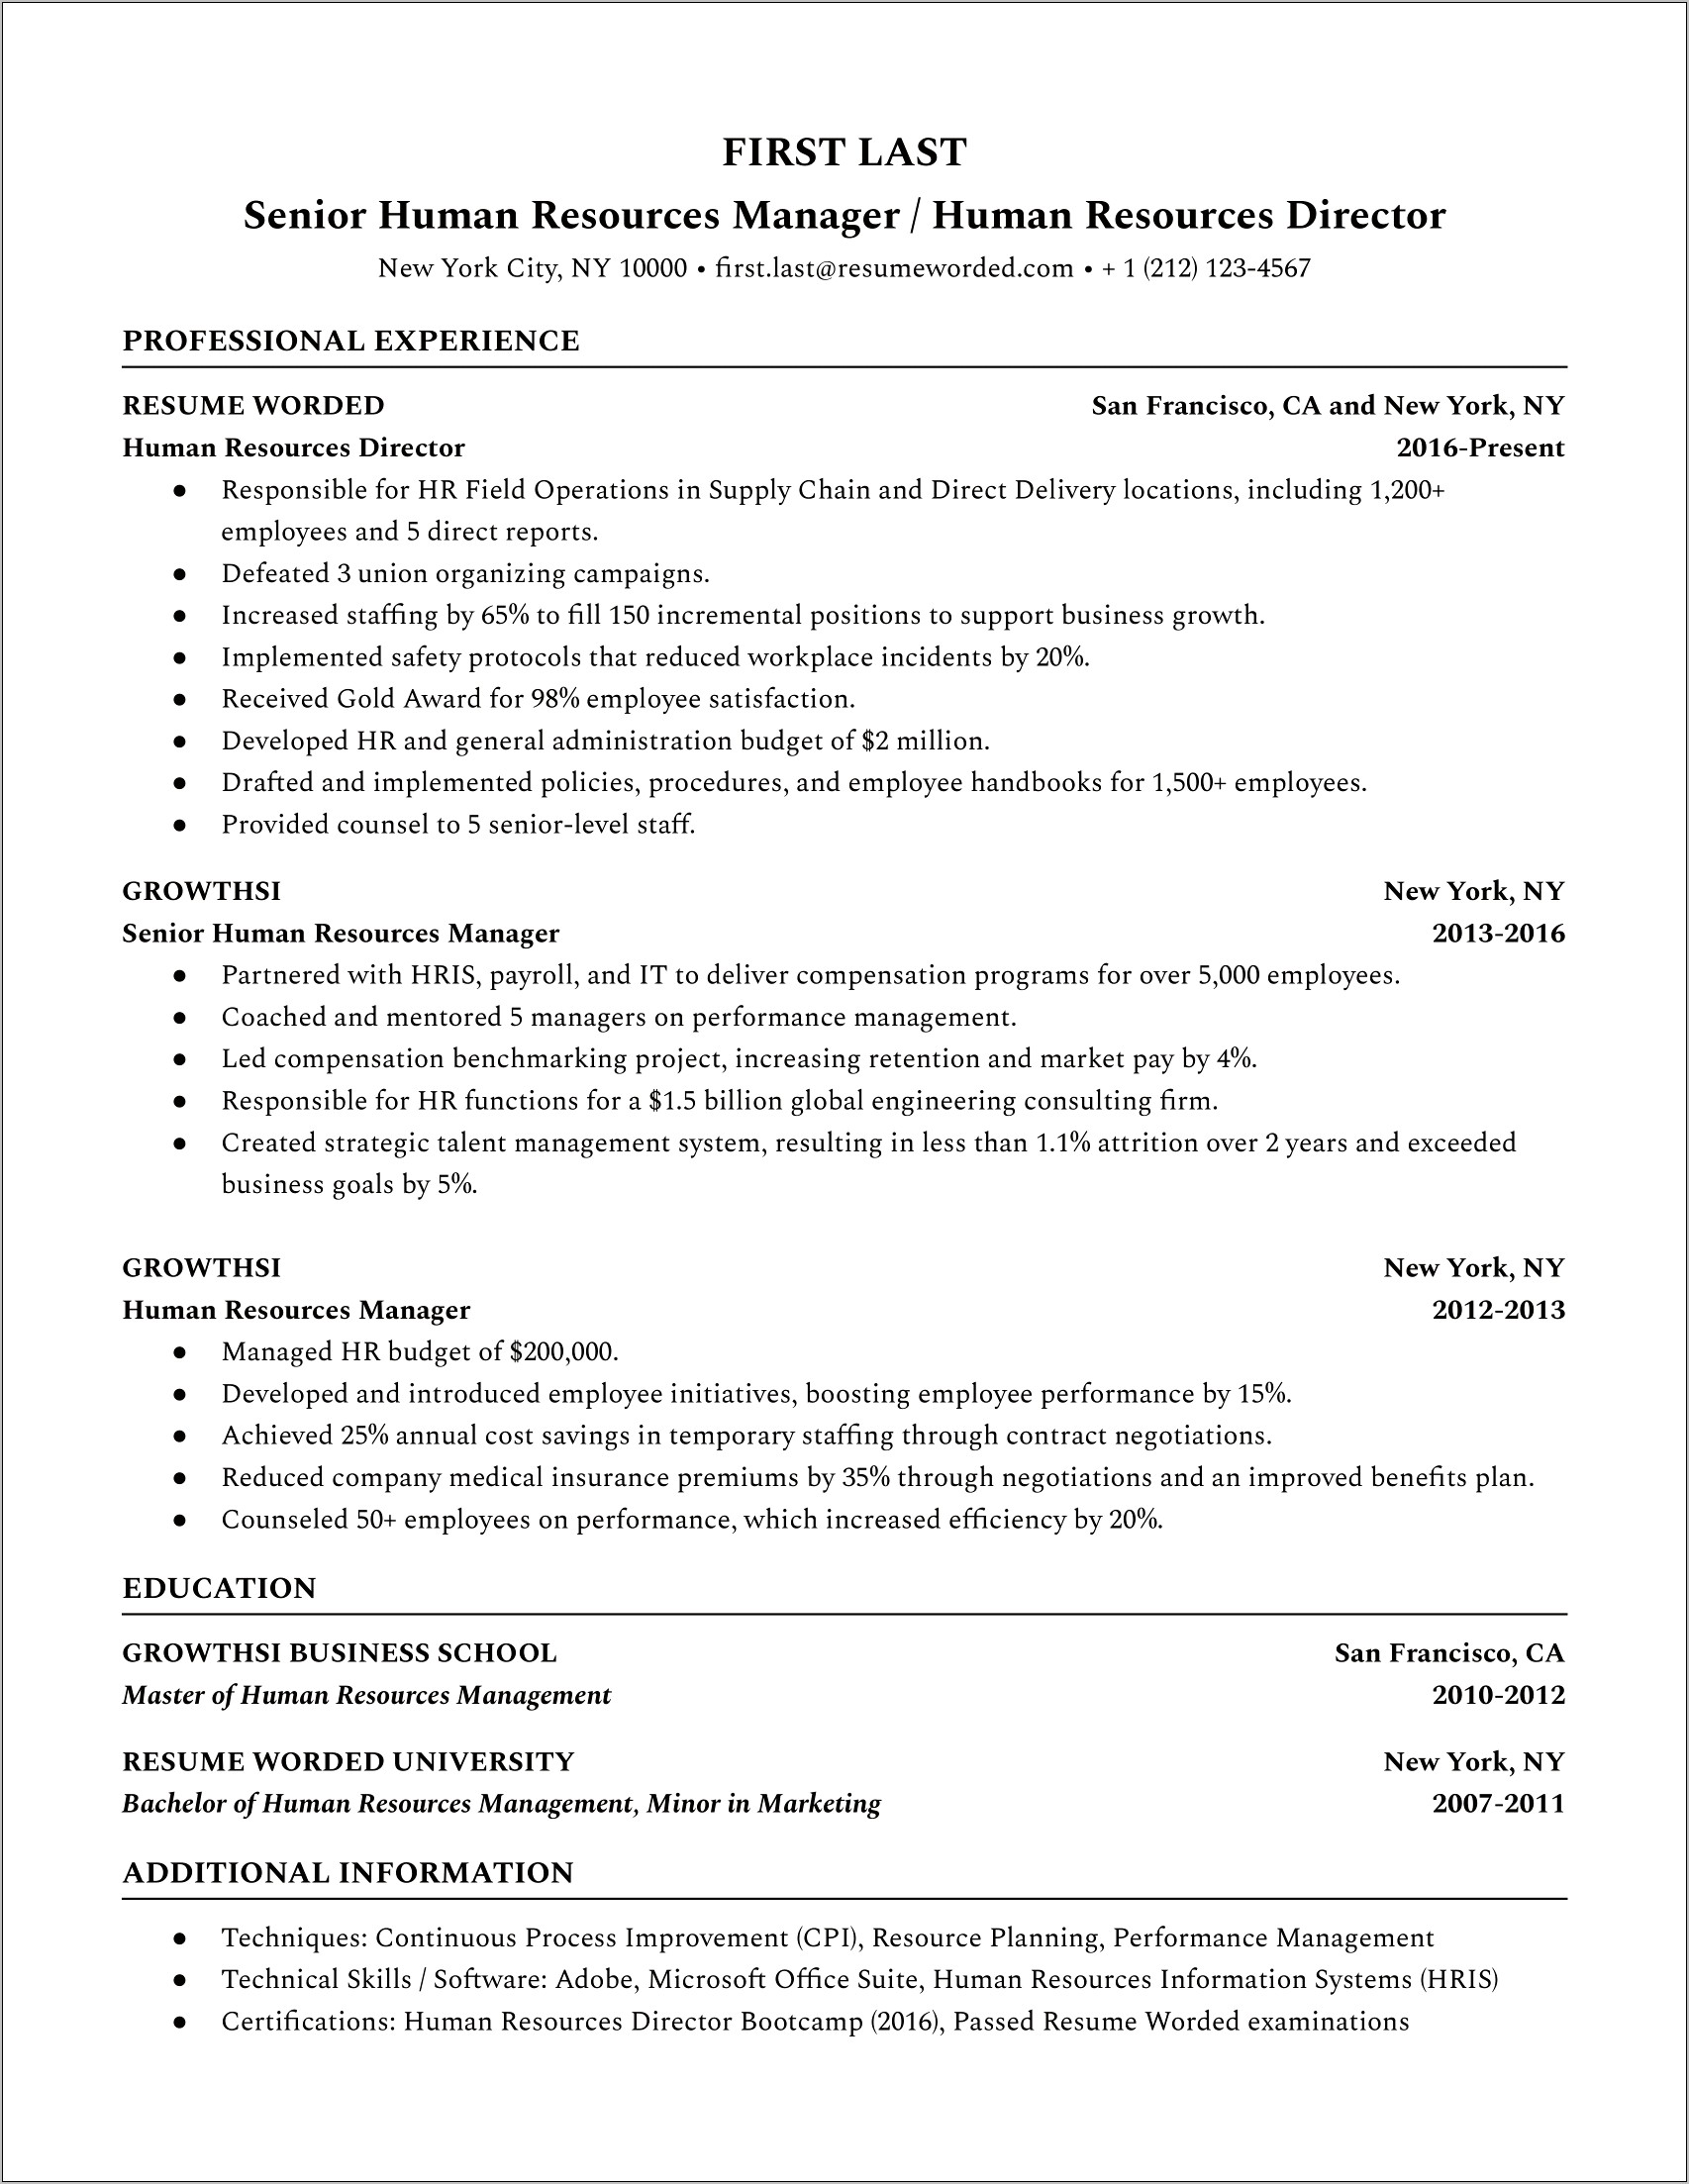 Resume Objective Human Resources Manager